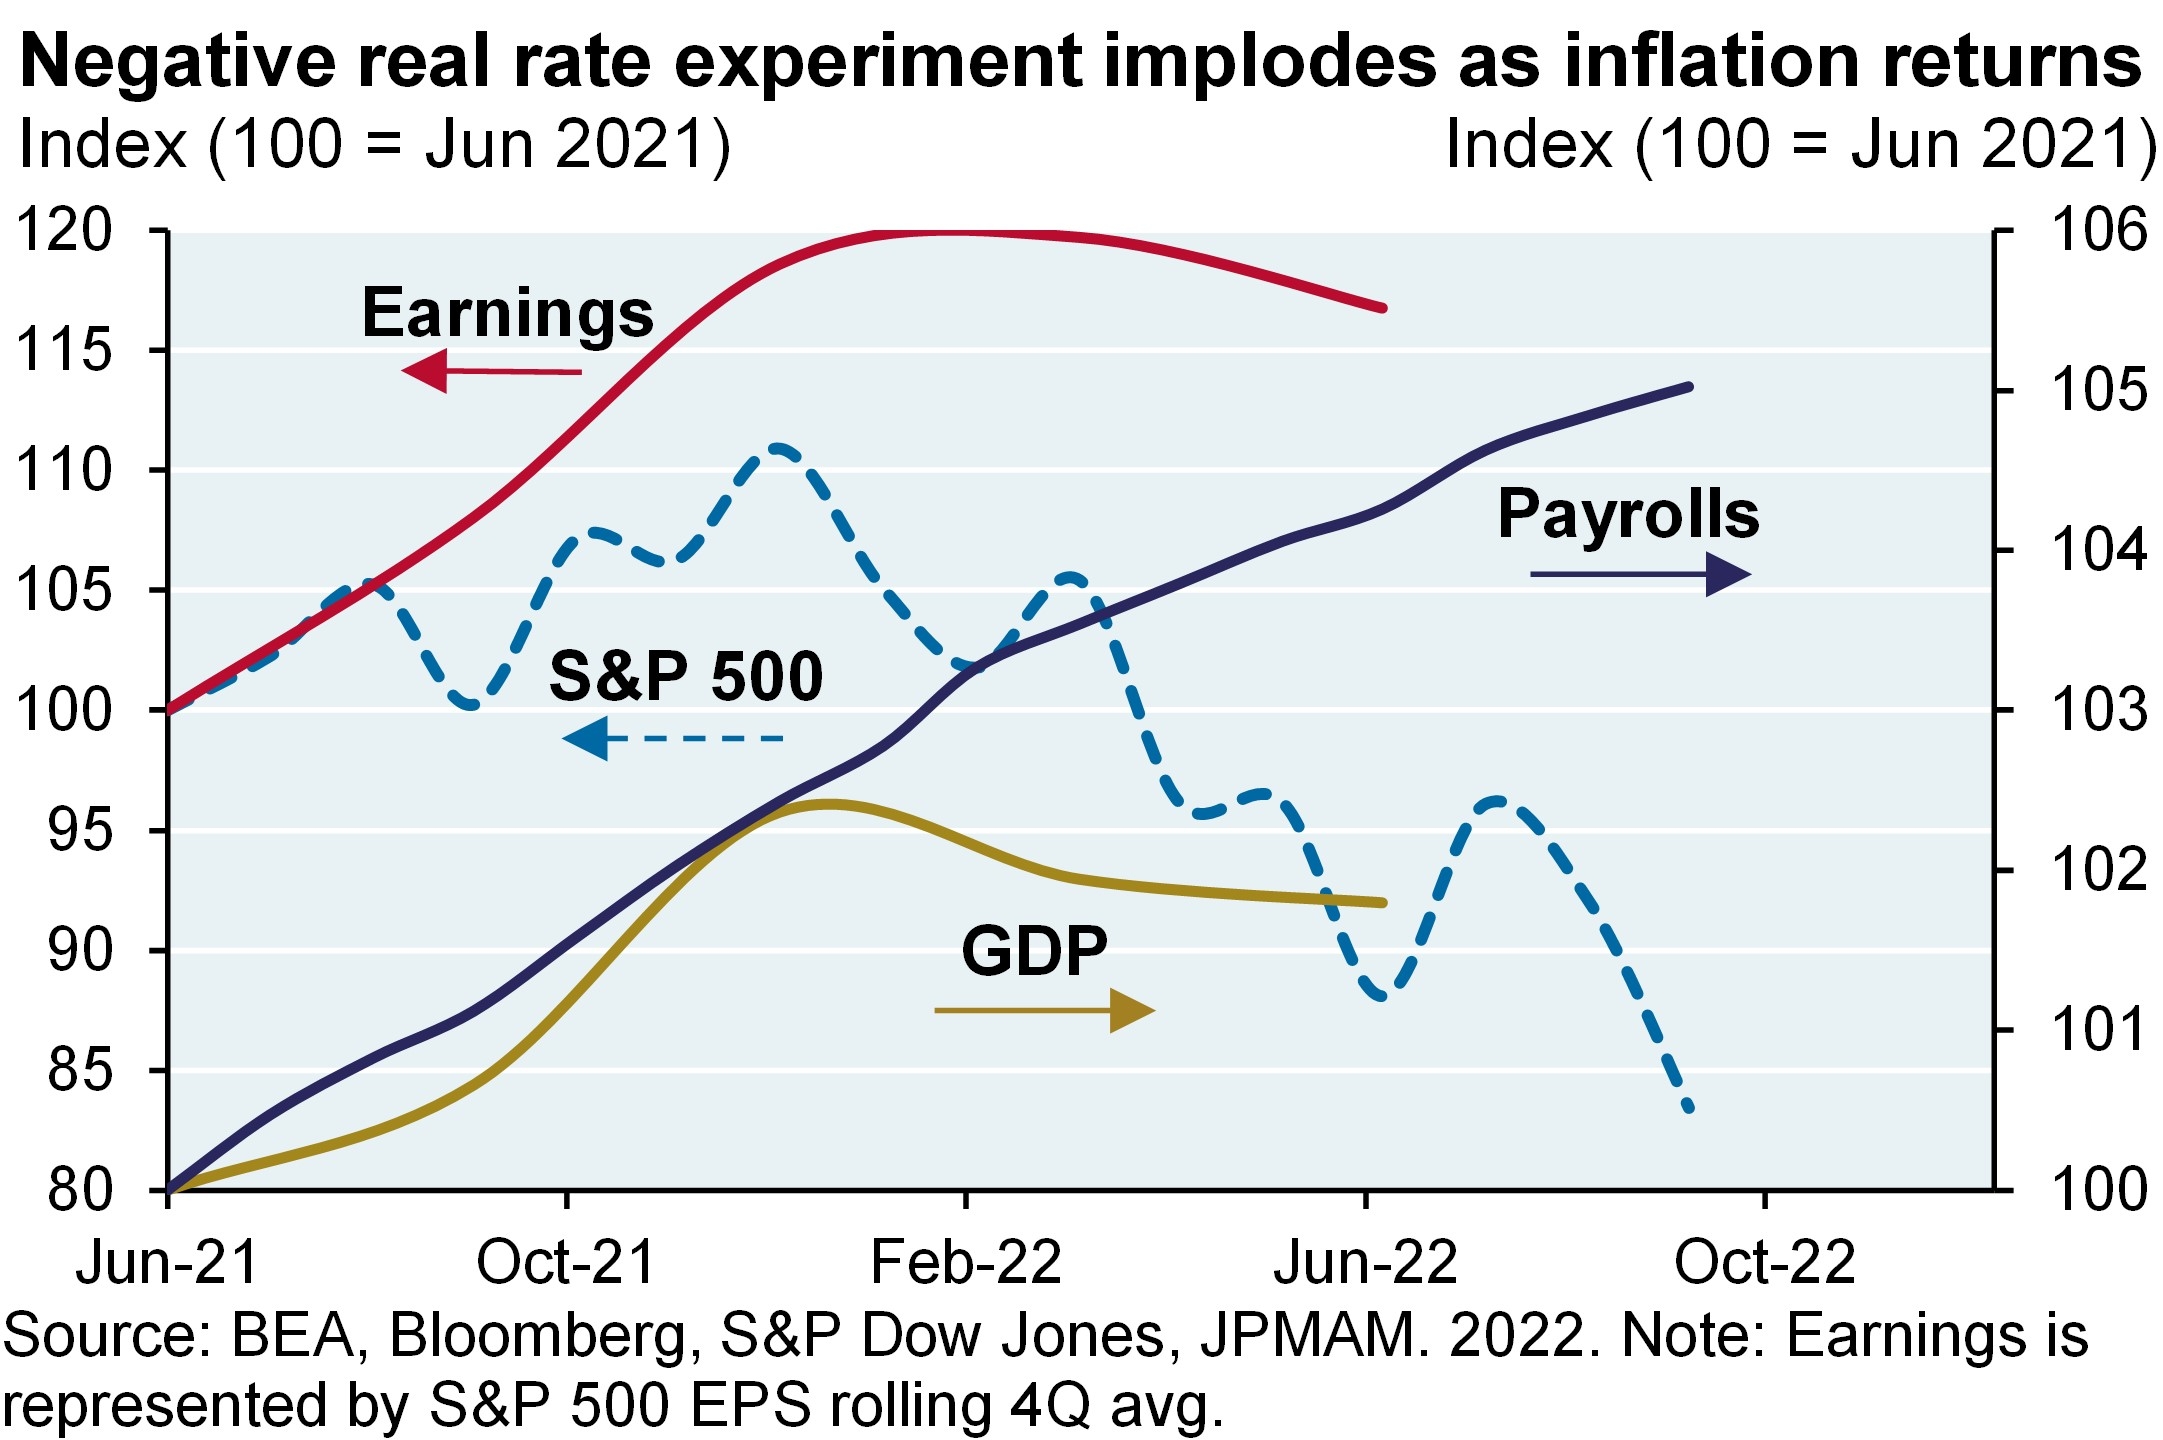 The indexed line chart compares the S&P 500, GDP, Earnings, and Nonfarm Payrolls in our current time period. The S&P 500 is leading the decline, beginning in January 2022, followed by GDP in March 2022 and Earnings in June 2022. Meanwhile, Payrolls are still rising.  